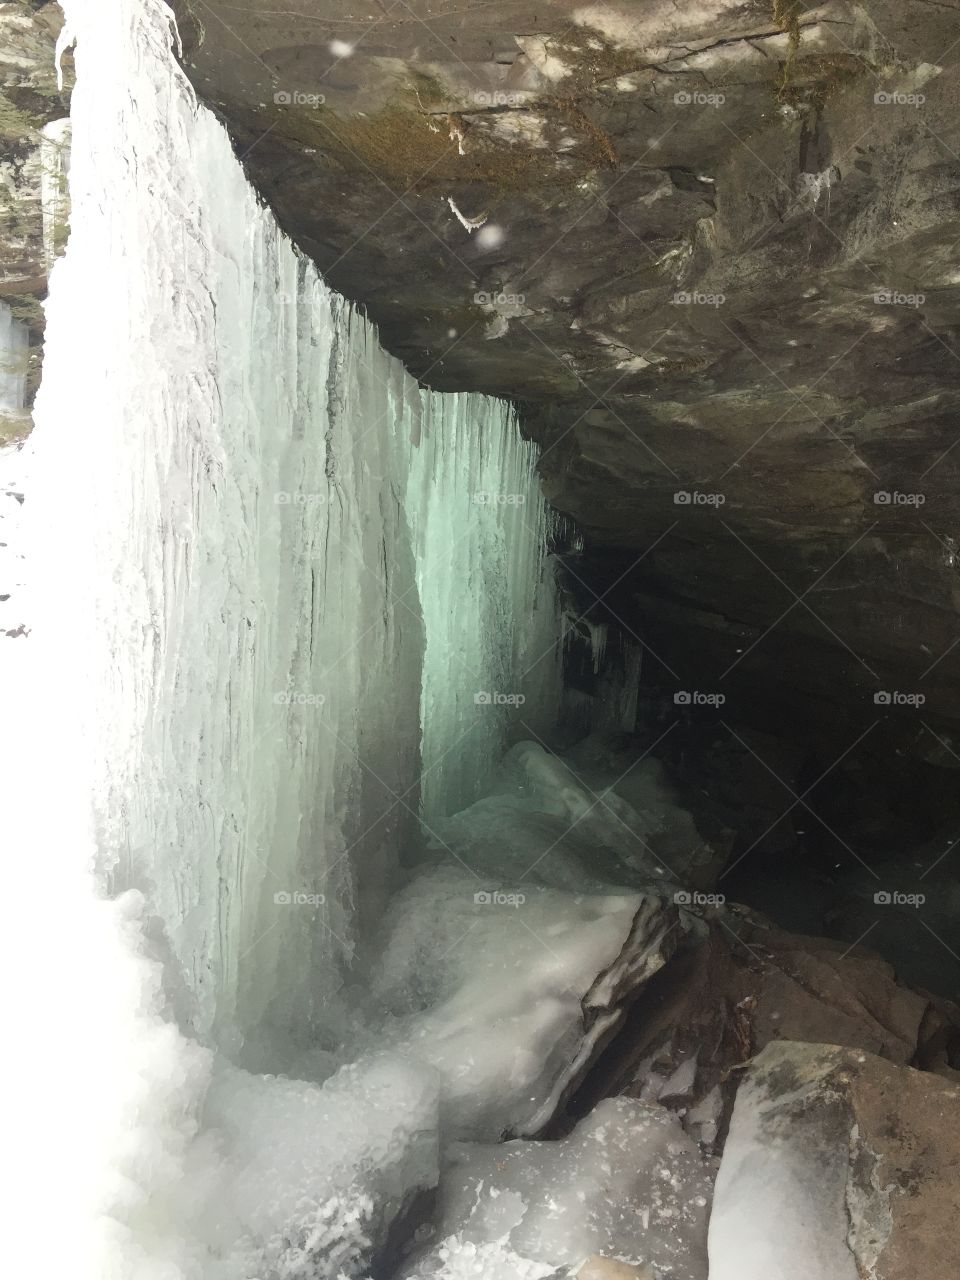 Ice cave exploring